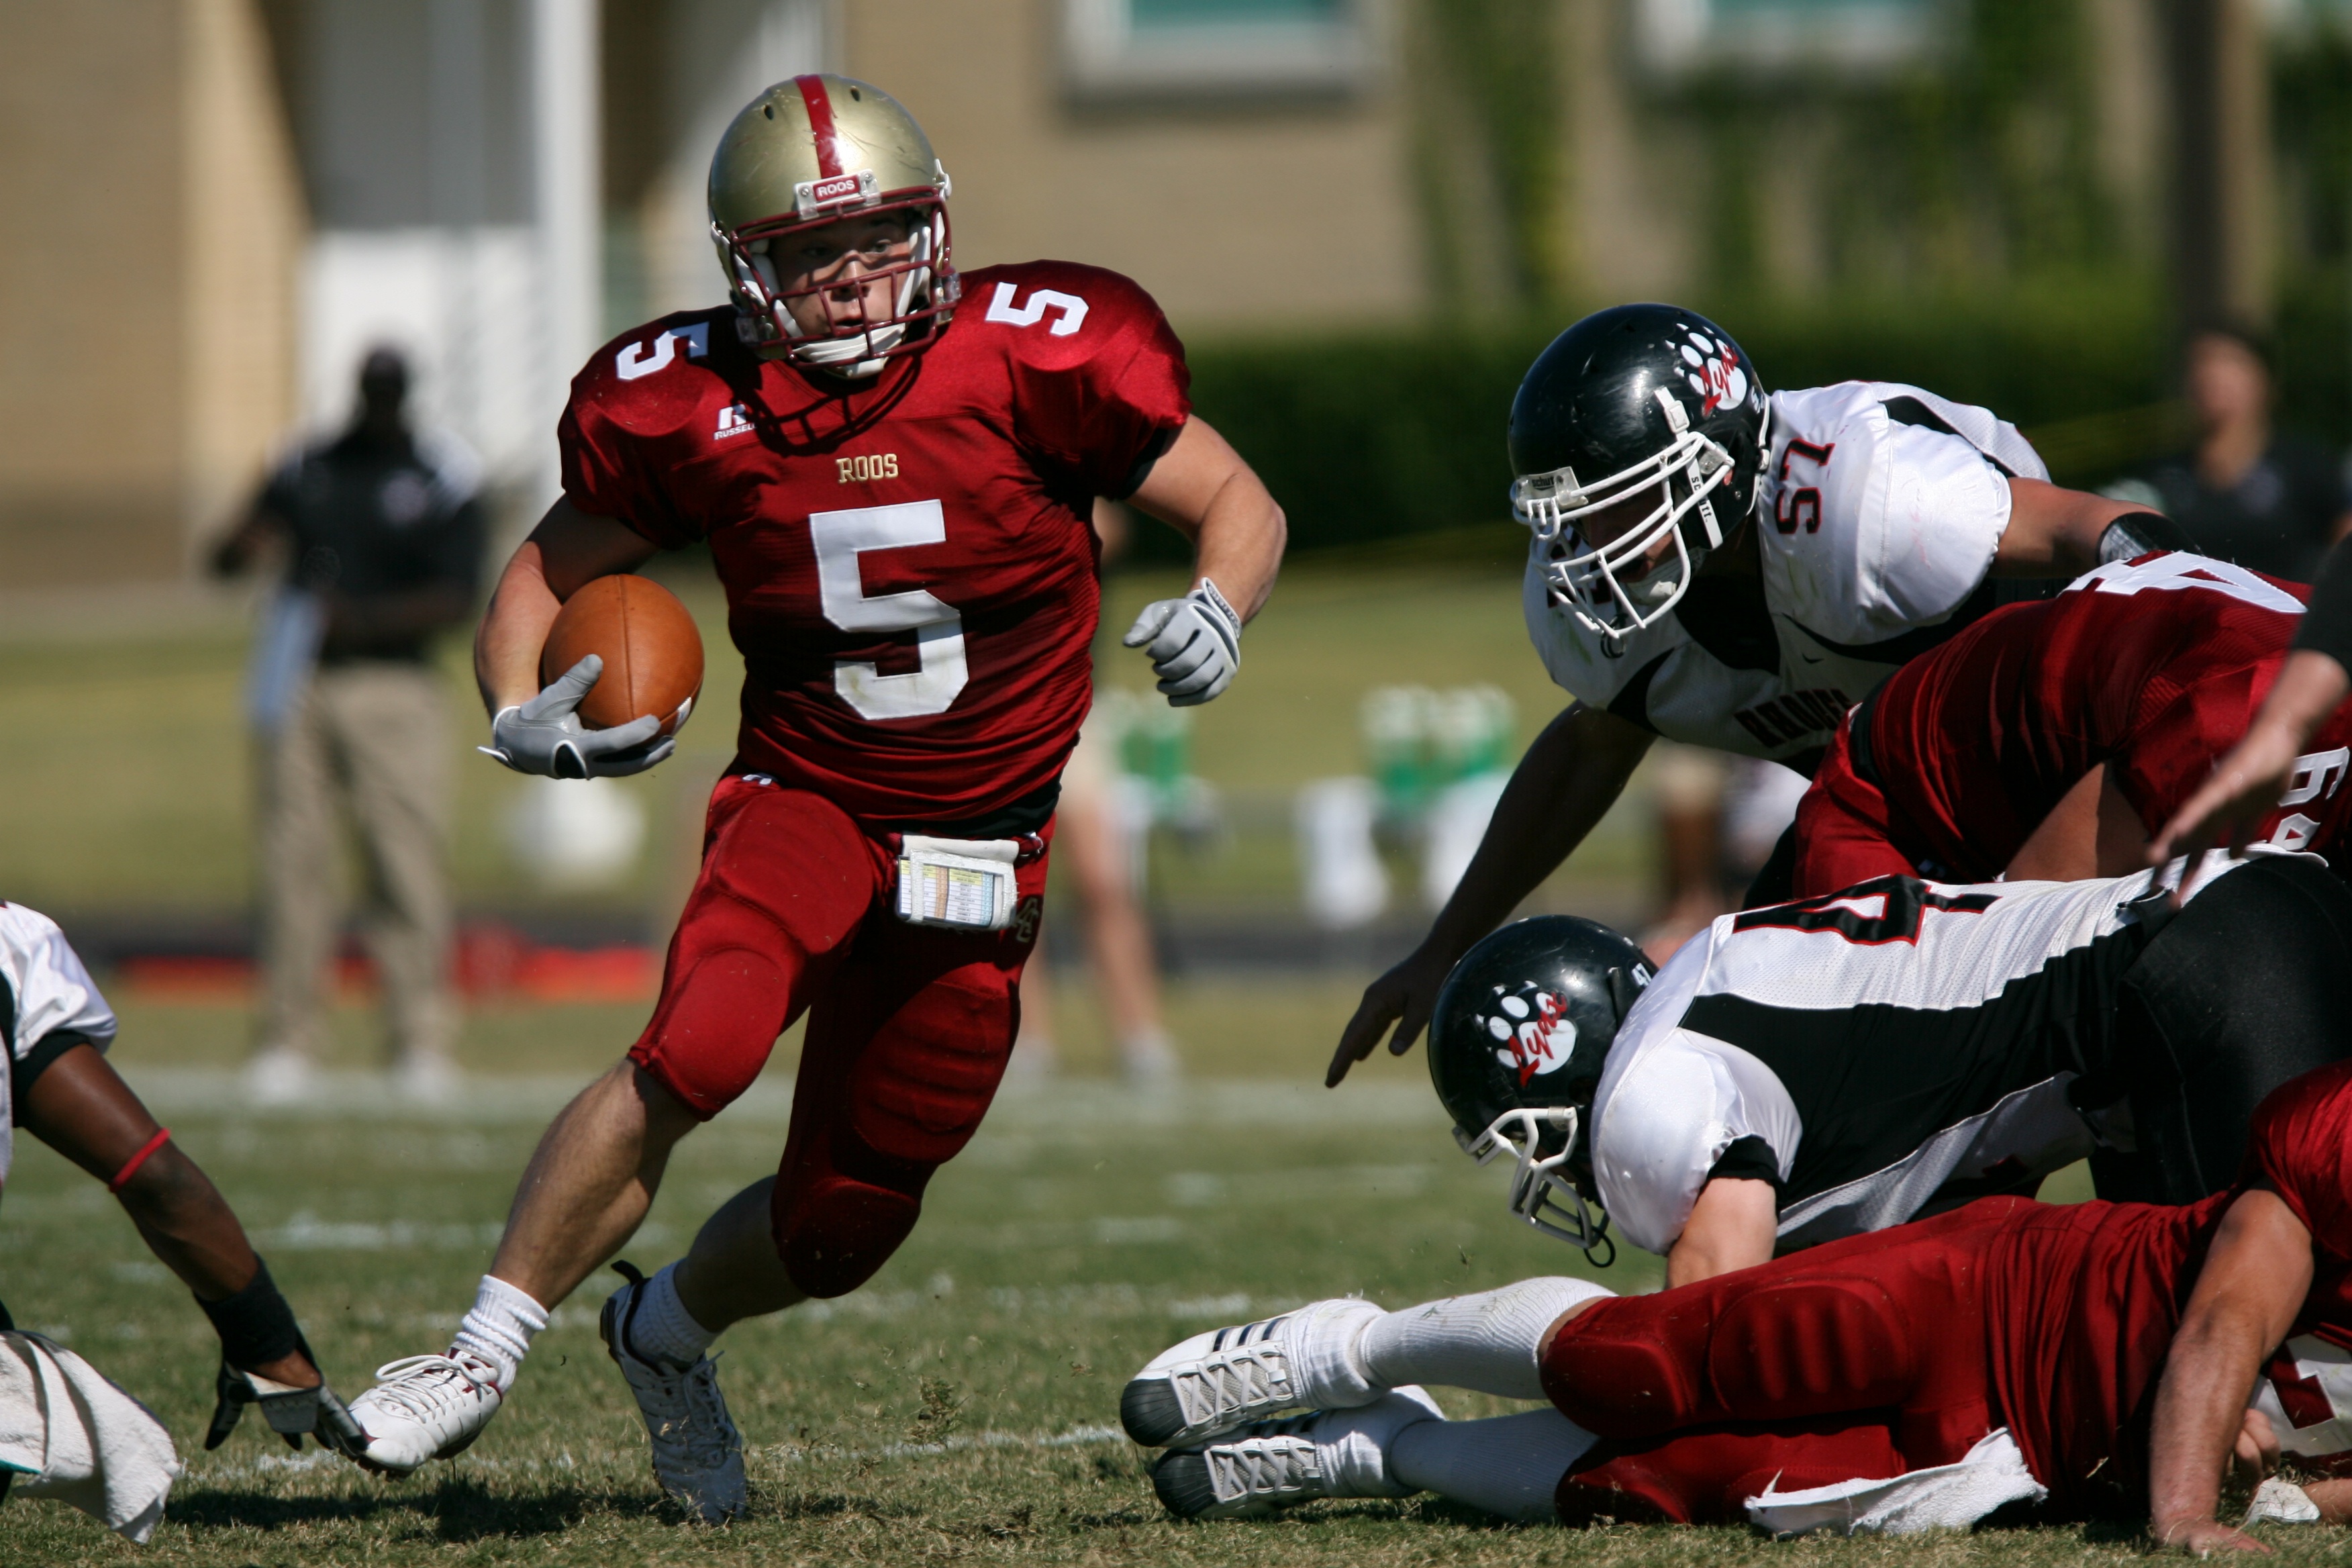 Free Images : sport, soccer, competition, american football, sports ...